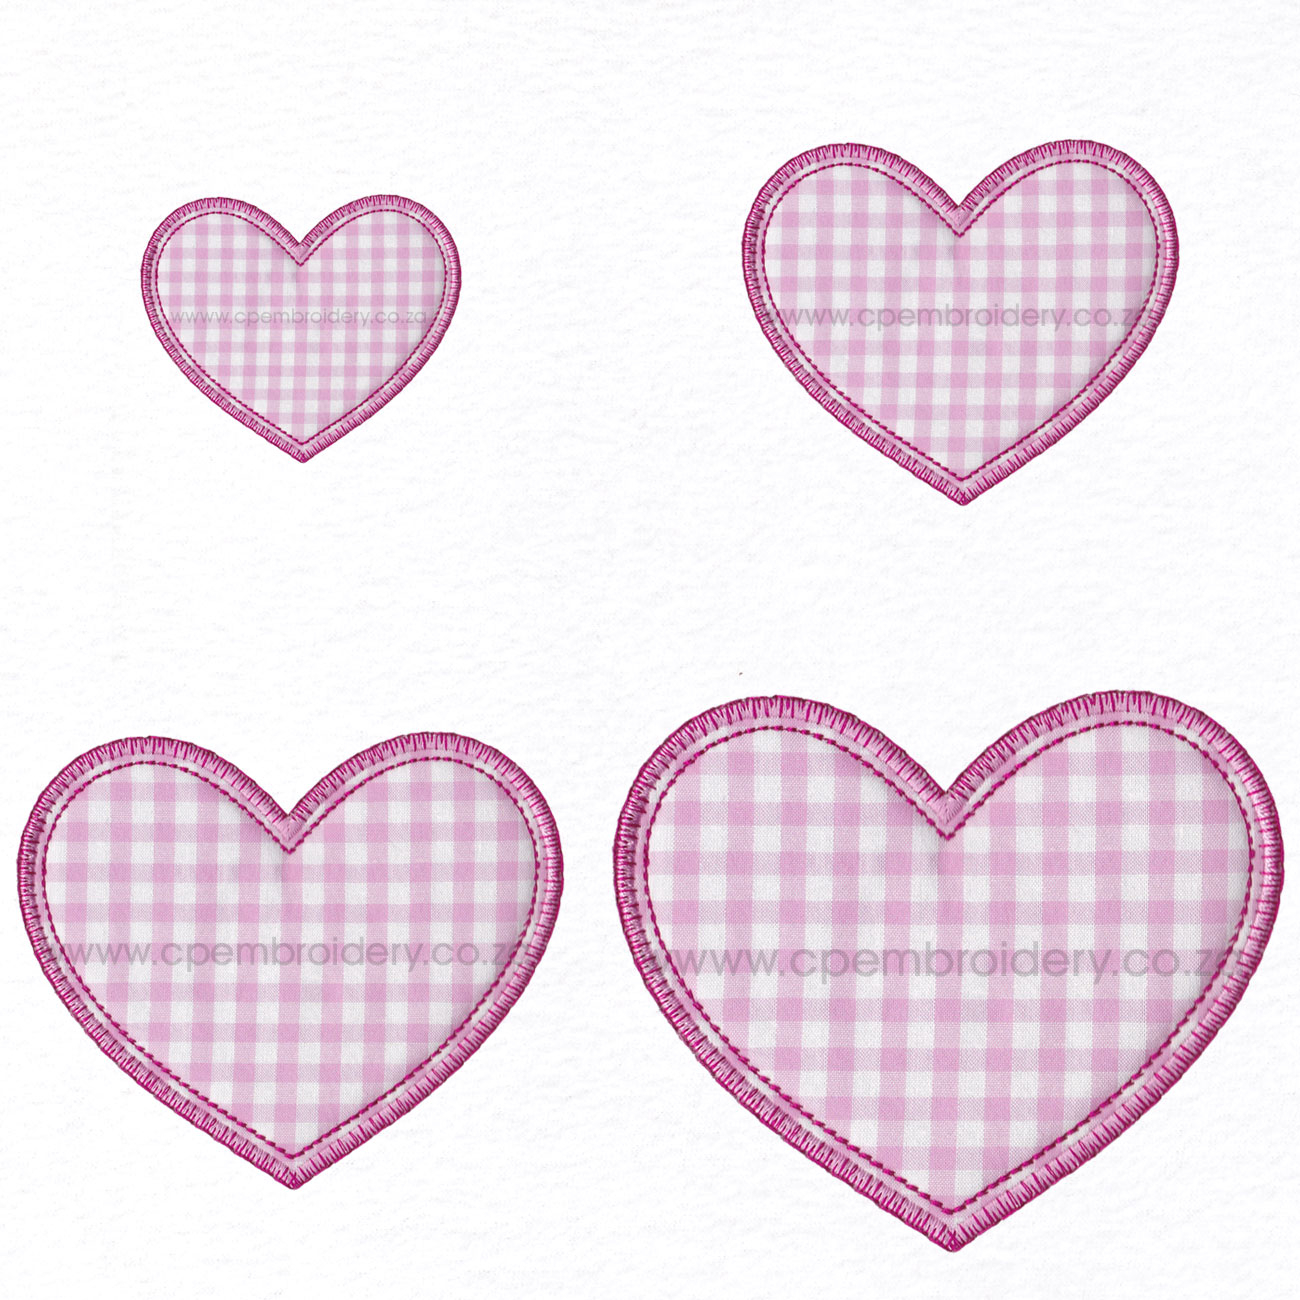 Gingham Embroidery Patterns Heart Appliqu Embroidery Design